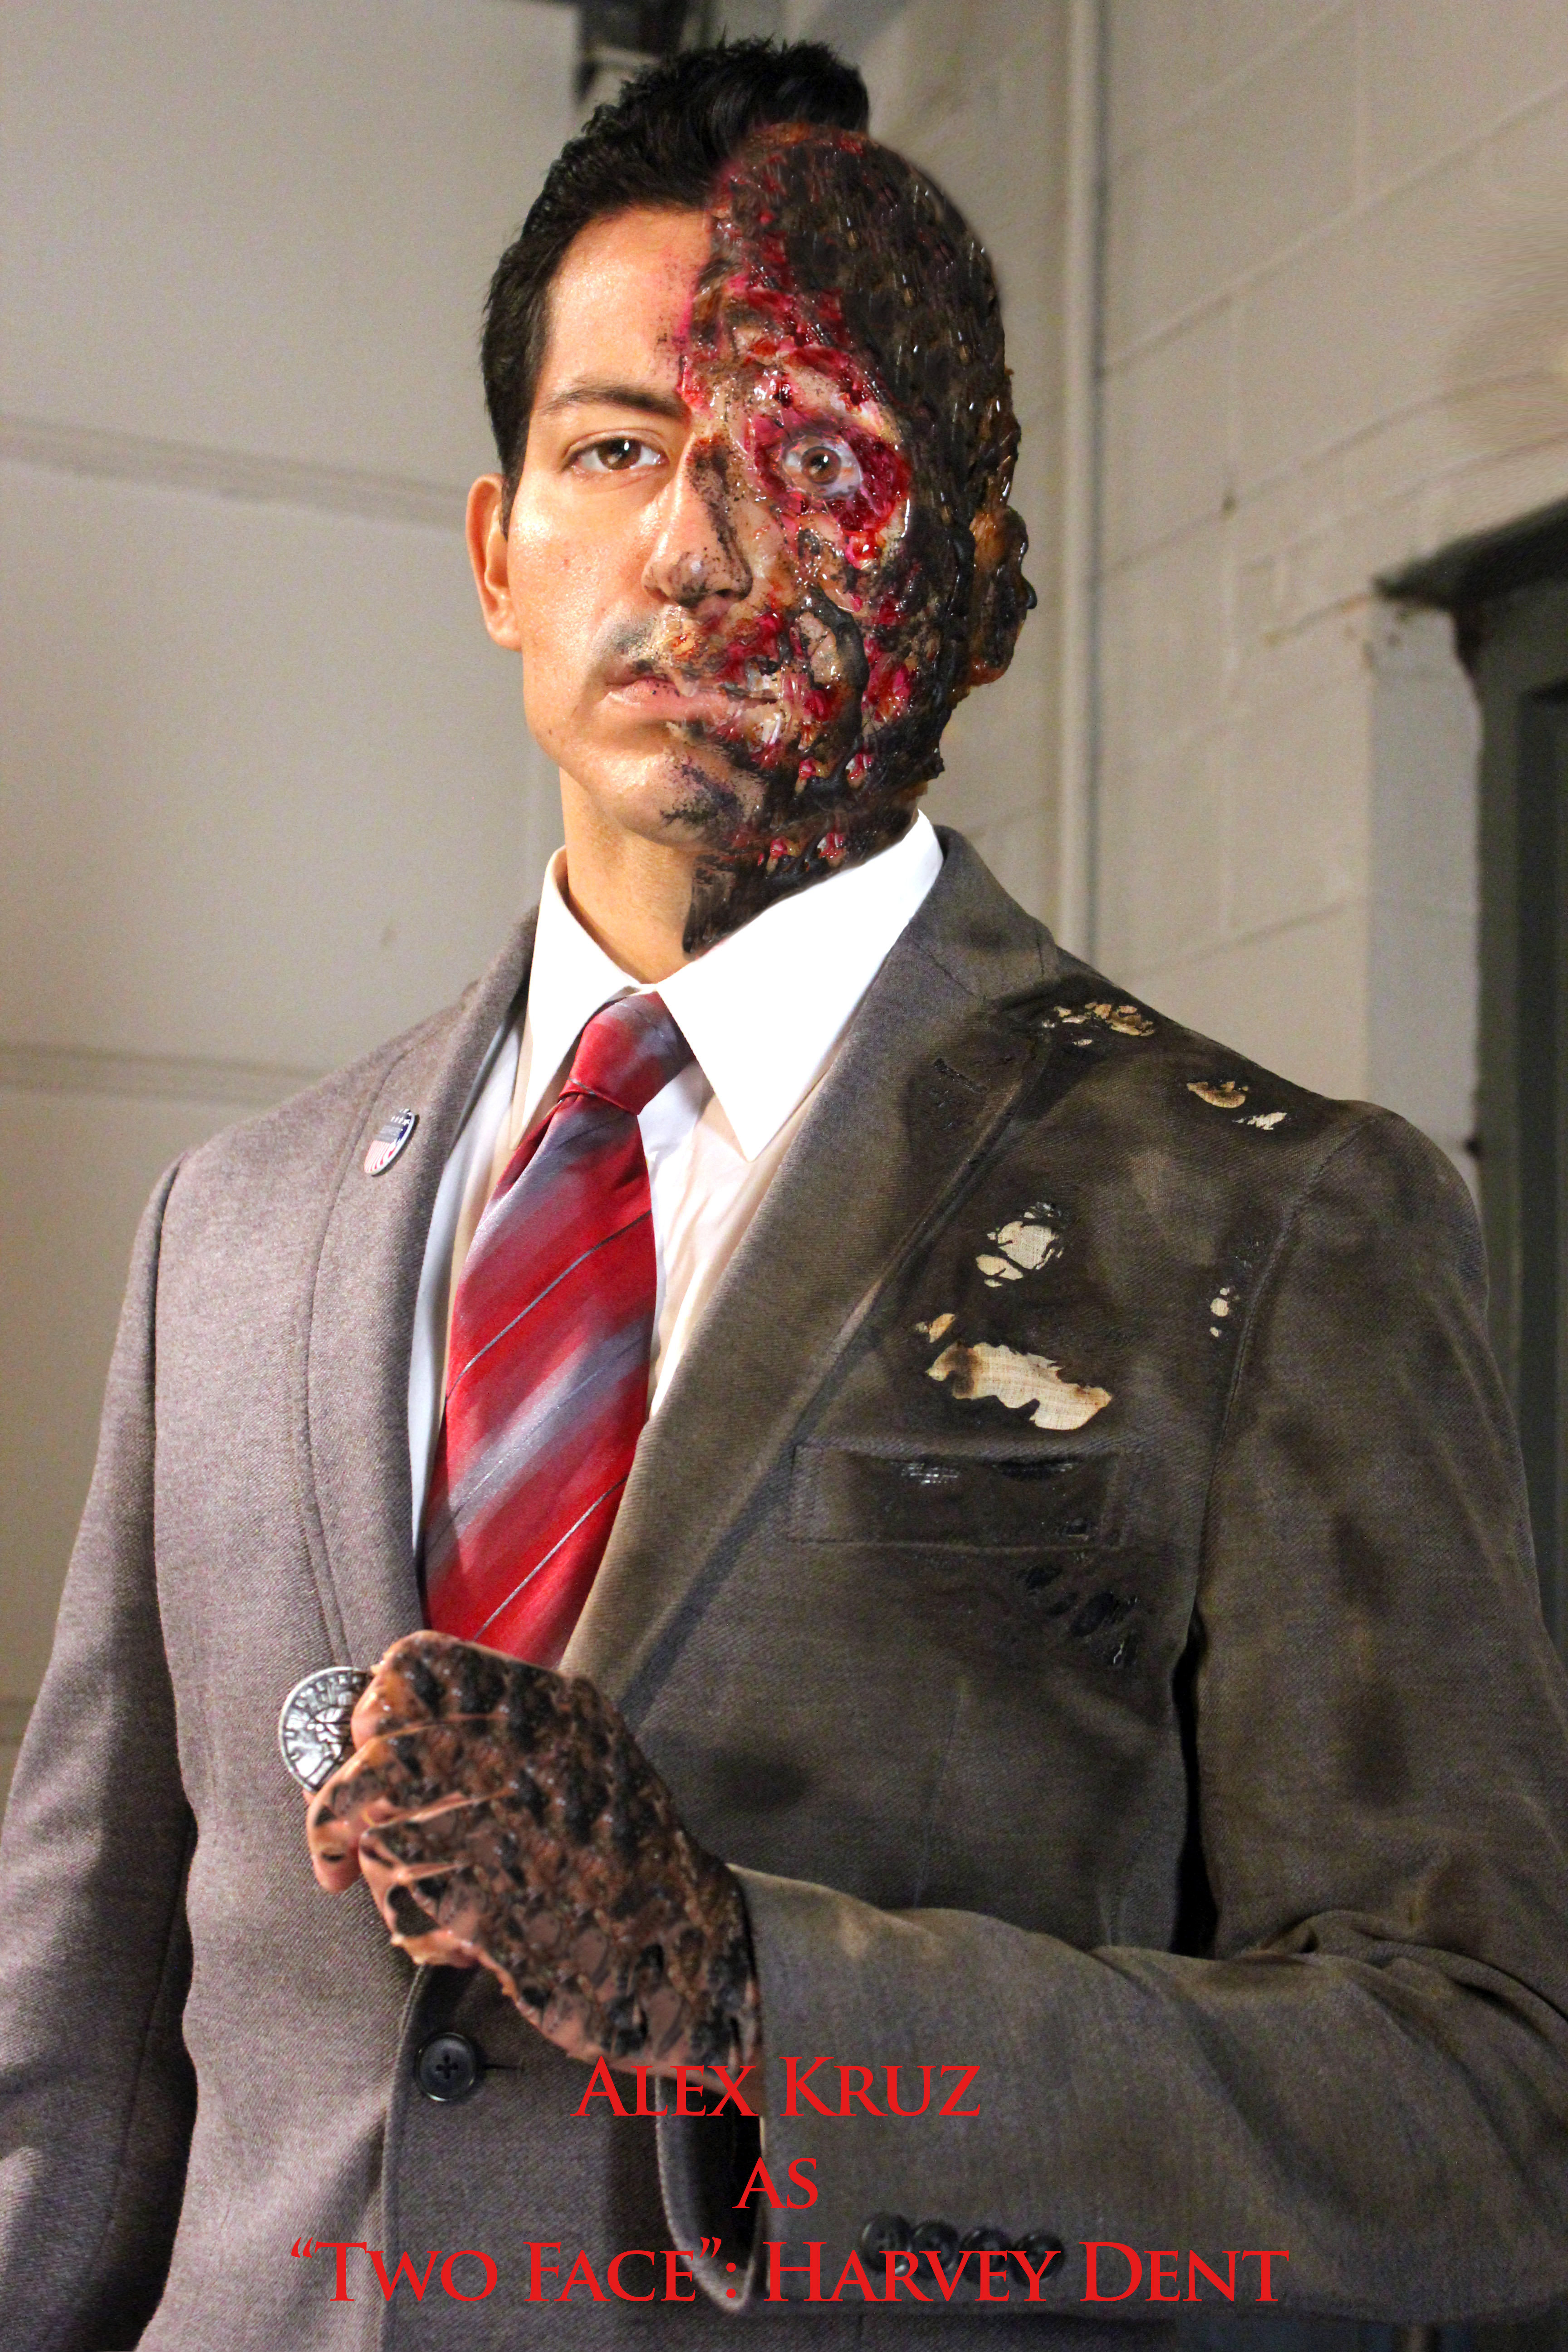 Alex Kruz with Two Face makeup which required him to shave his head to hold the makeup down for the role.